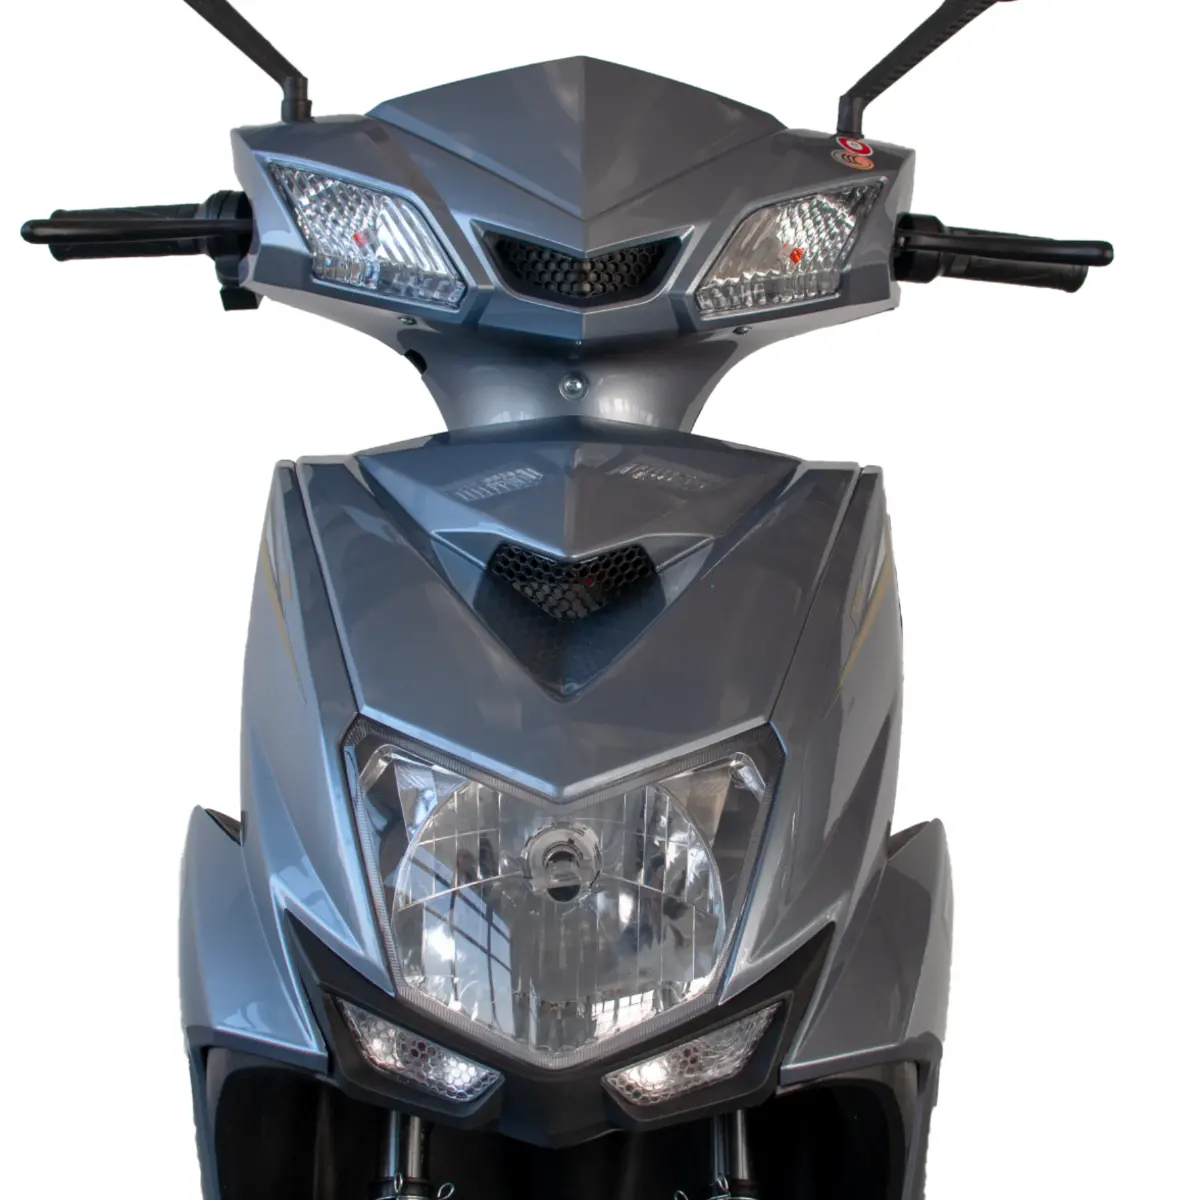 FORMA Hot Sale High Speed Motos Bike 1000w 60 Km/h Electric Motorcycle Moto Electrica With Good Price